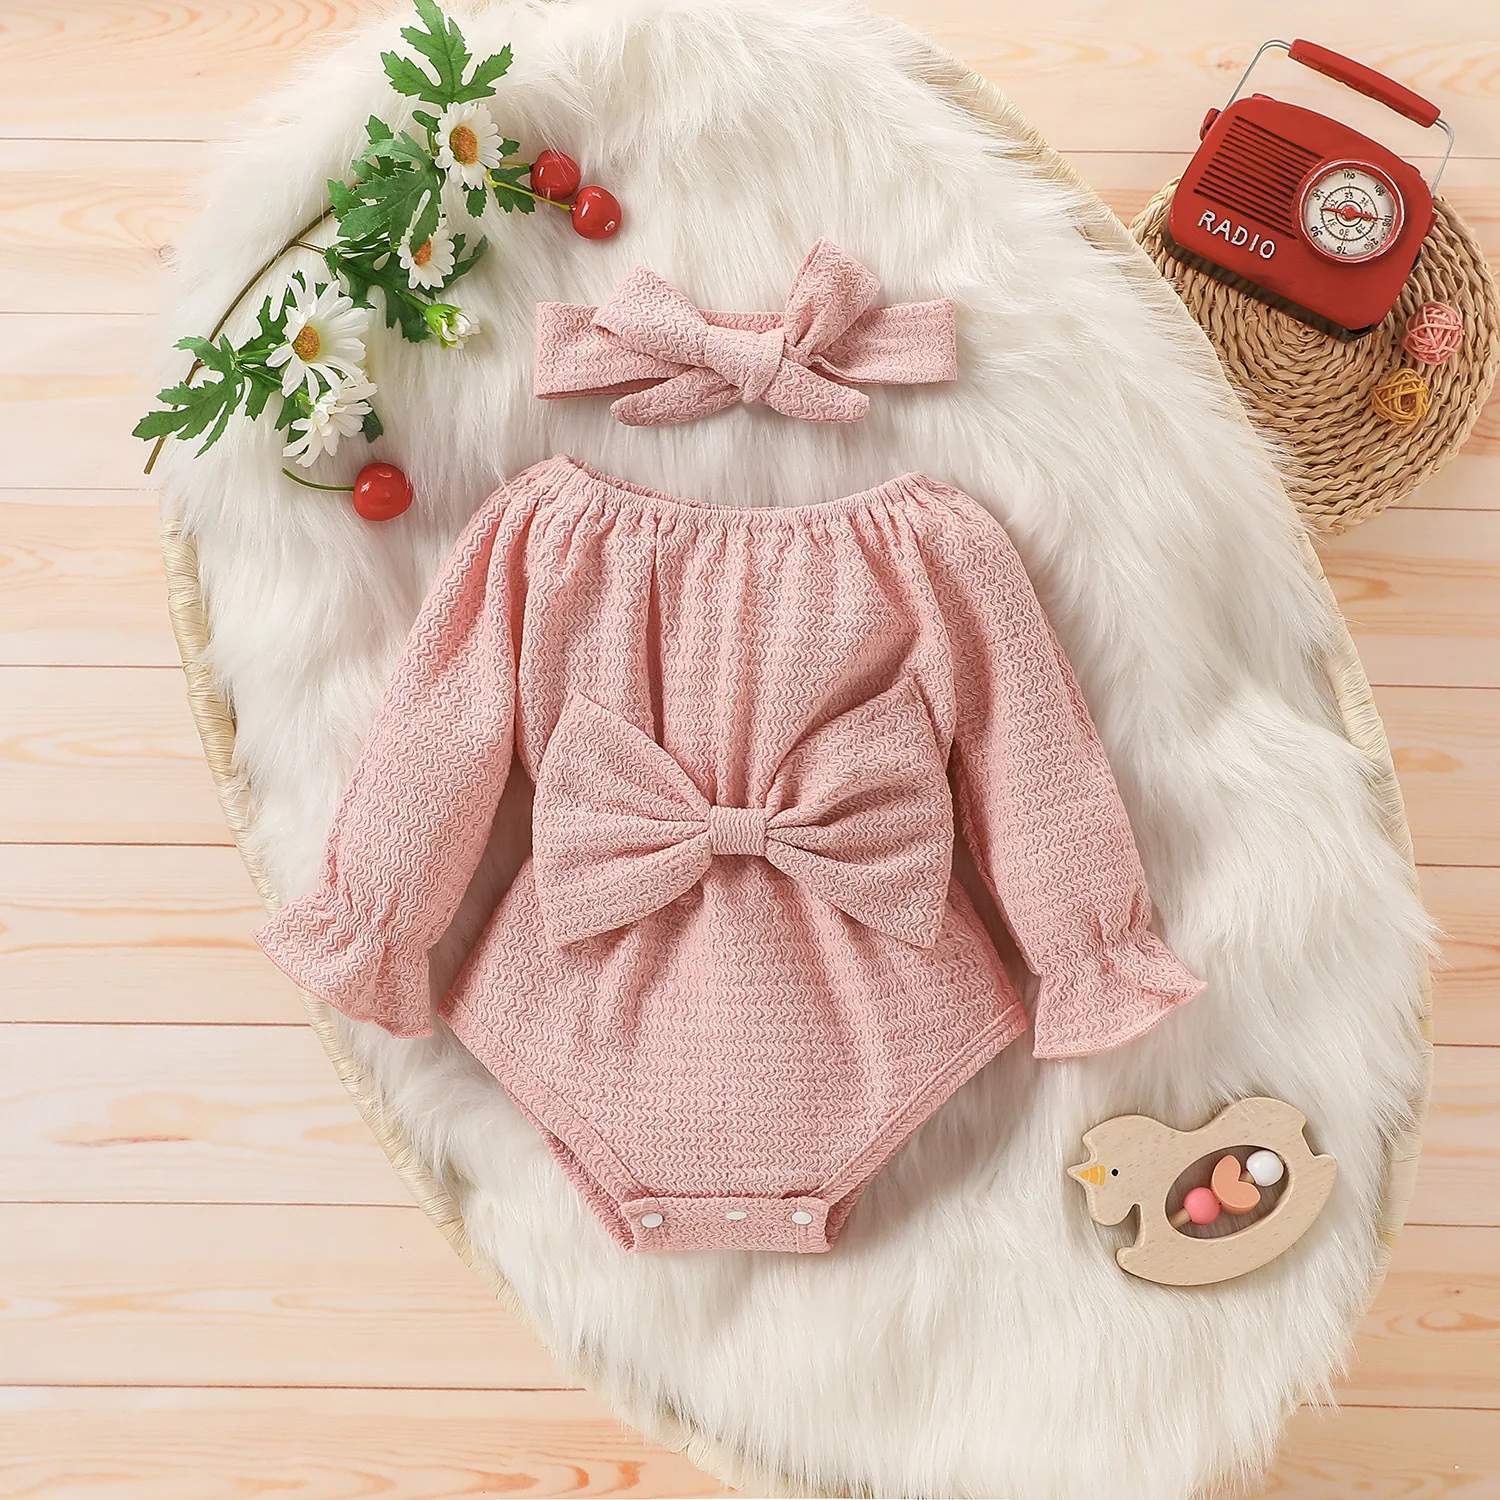 Long Sleeves Bowknot Baby Gril Rompers Headband  Baby Onesie  Girls Outfits  Baby Boutique Clothing  Newborn Girl Outfit